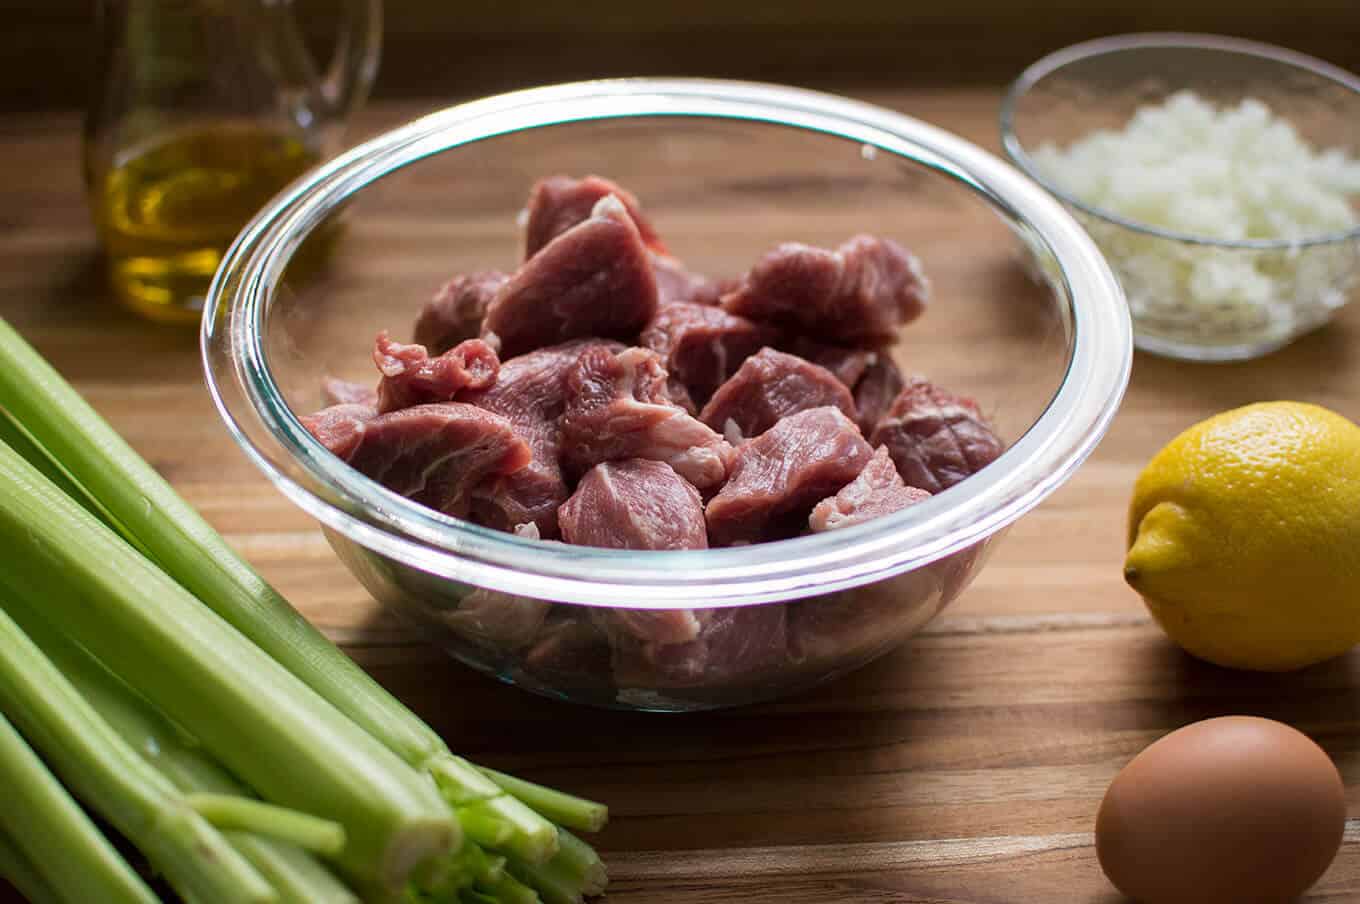 Cubed raw pork shoulder in a glass bowl with celery, olive oil, onions, a lemon, and egg surrounding it.